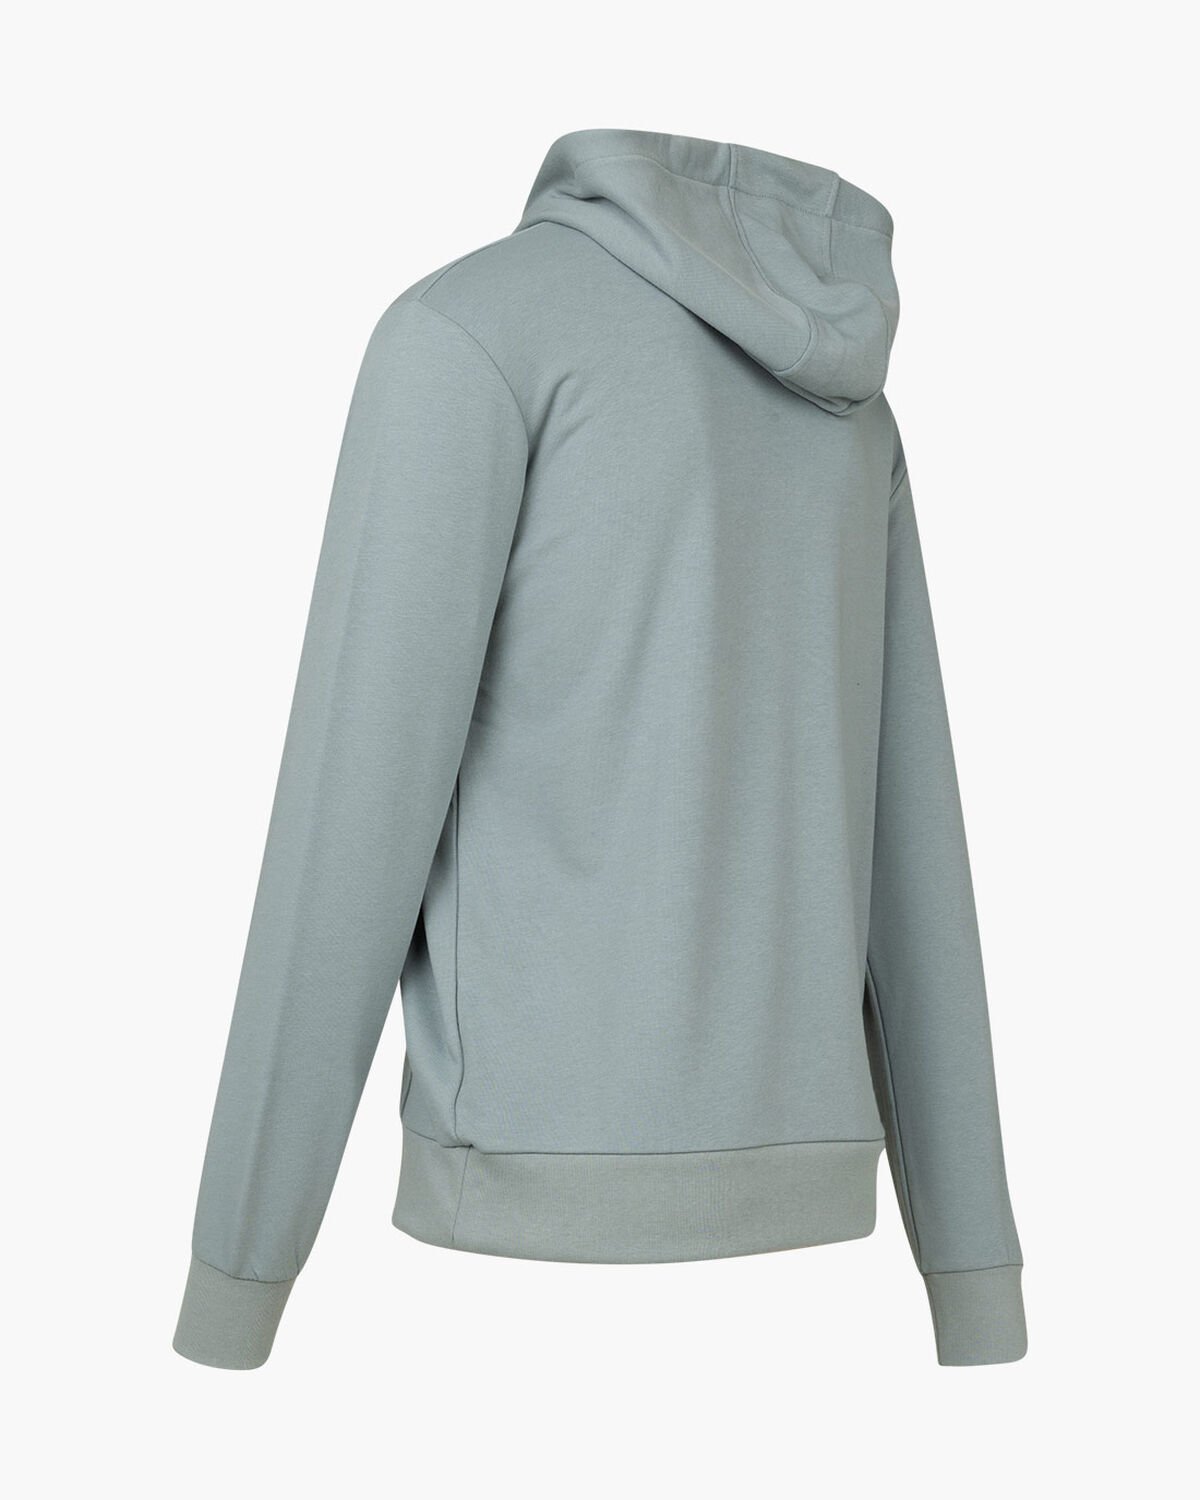 Do Hoodie - 80% Cotton / 20% Polyester, Blue, hi-res